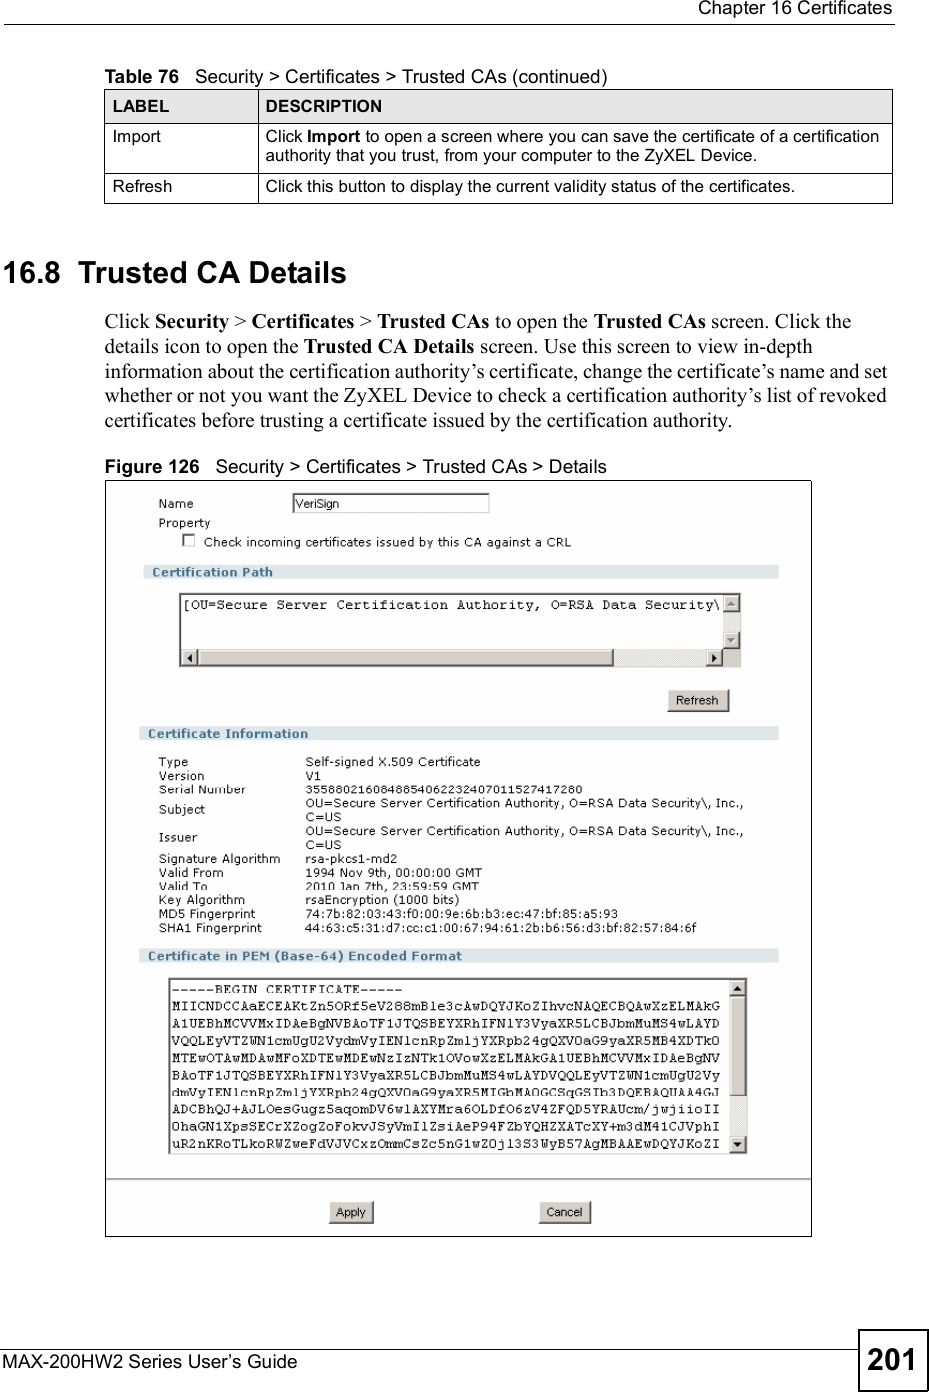  Chapter 16CertificatesMAX-200HW2 Series User s Guide 20116.8  Trusted CA Details  Click Security &gt; Certificates &gt; Trusted CAs to open the Trusted CAs screen. Click the details icon to open the Trusted CA Details screen. Use this screen to view in-depth information about the certification authority!s certificate, change the certificate!s name and set whether or not you want the ZyXEL Device to check a certification authority!s list of revoked certificates before trusting a certificate issued by the certification authority.Figure 126   Security &gt; Certificates &gt; Trusted CAs &gt; DetailsImportClick Import to open a screen where you can save the certificate of a certification authority that you trust, from your computer to the ZyXEL Device.RefreshClick this button to display the current validity status of the certificates.Table 76   Security &gt; Certificates &gt; Trusted CAs (continued)LABEL DESCRIPTION